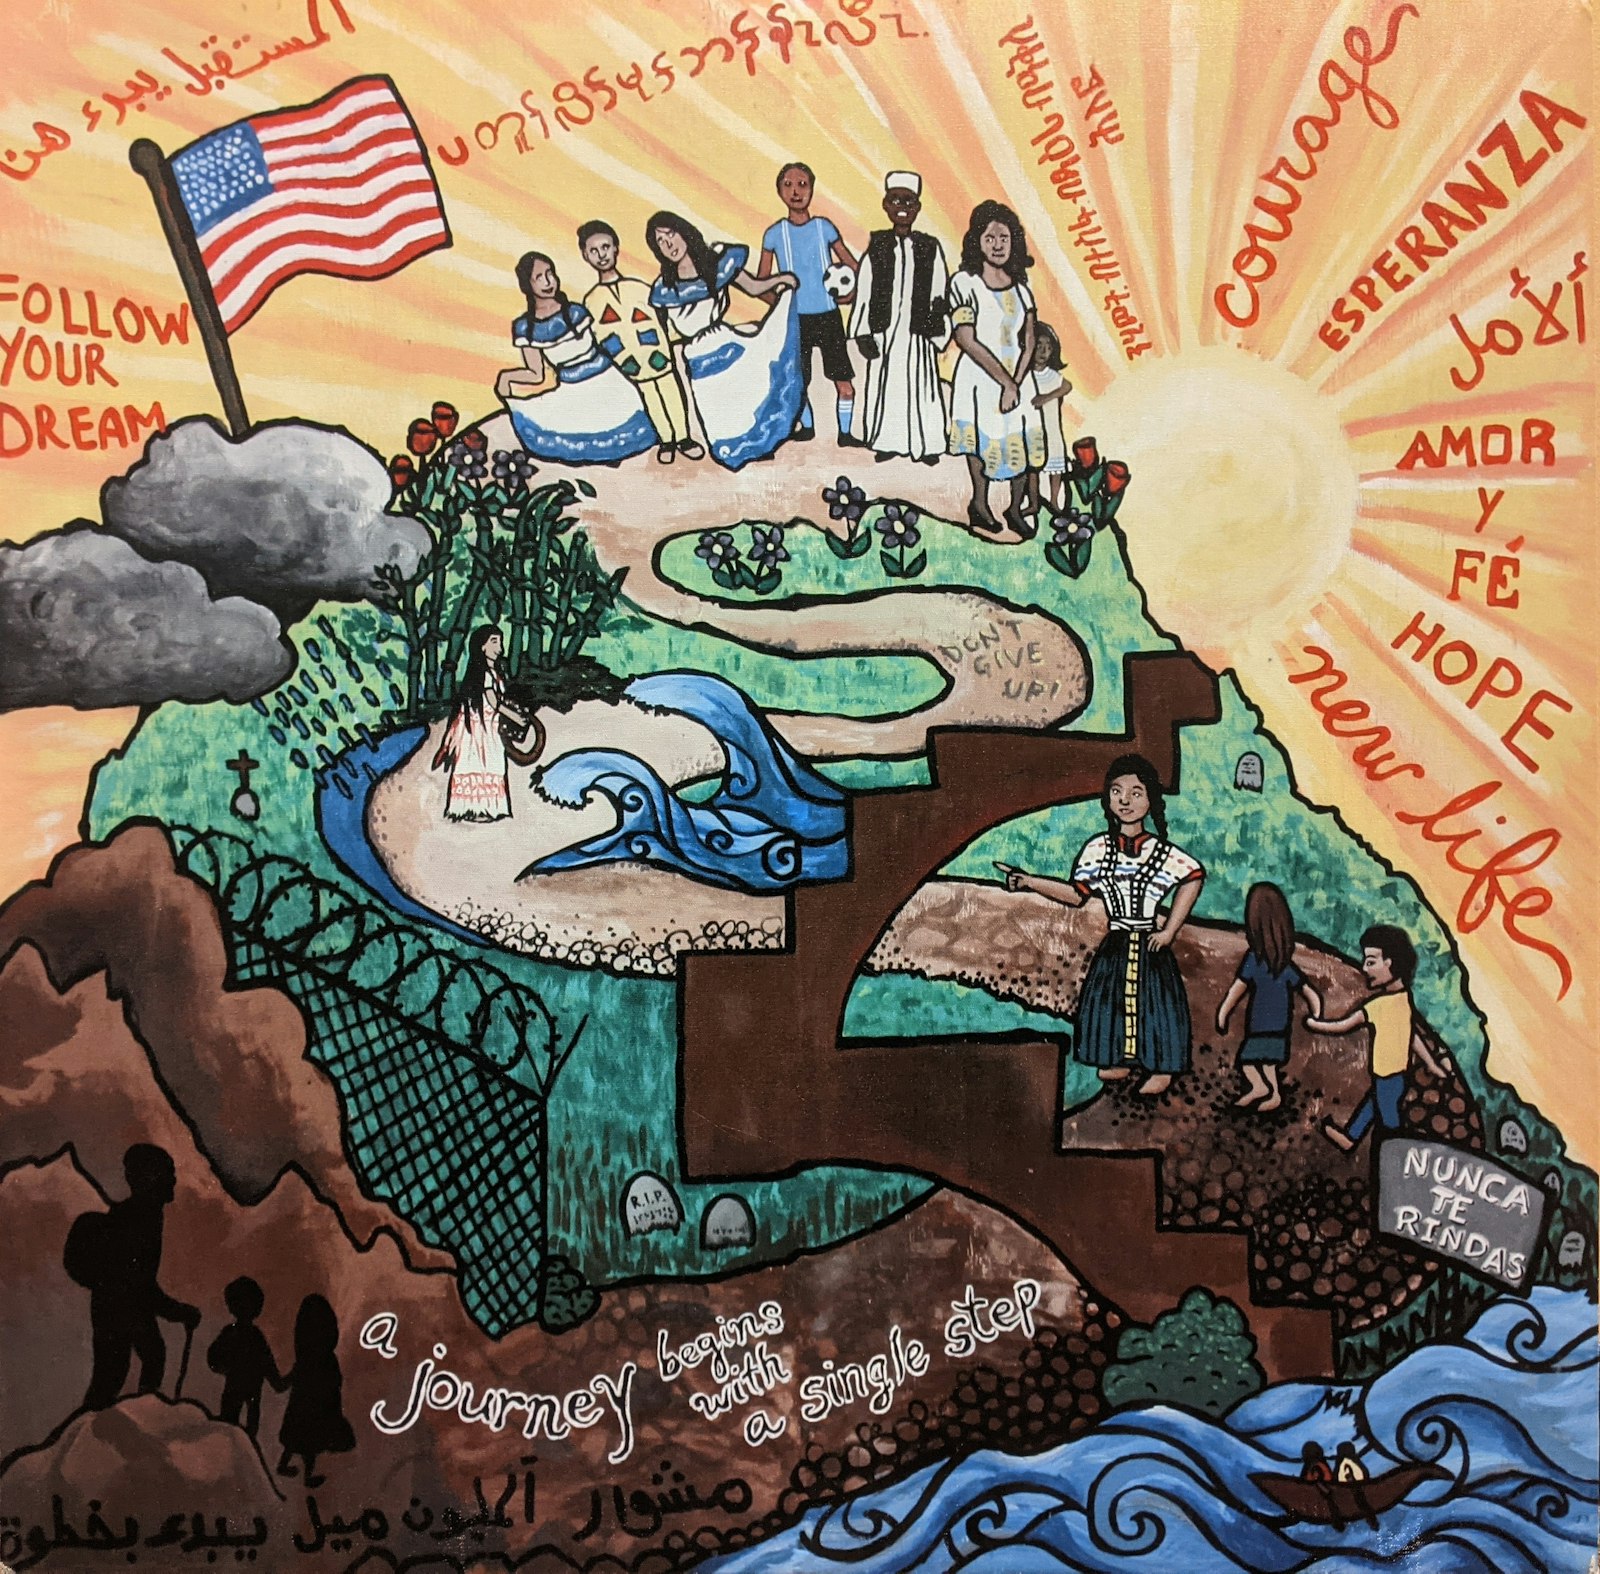 “Reflections on a Journey,” a mural created by refugee children in Michigan, was completed with the help of a professional artist in Lansing to commemorate World Refugee Awareness Week in 2015. Small canvas copies of the piece are on display at several art galleries in Michigan.